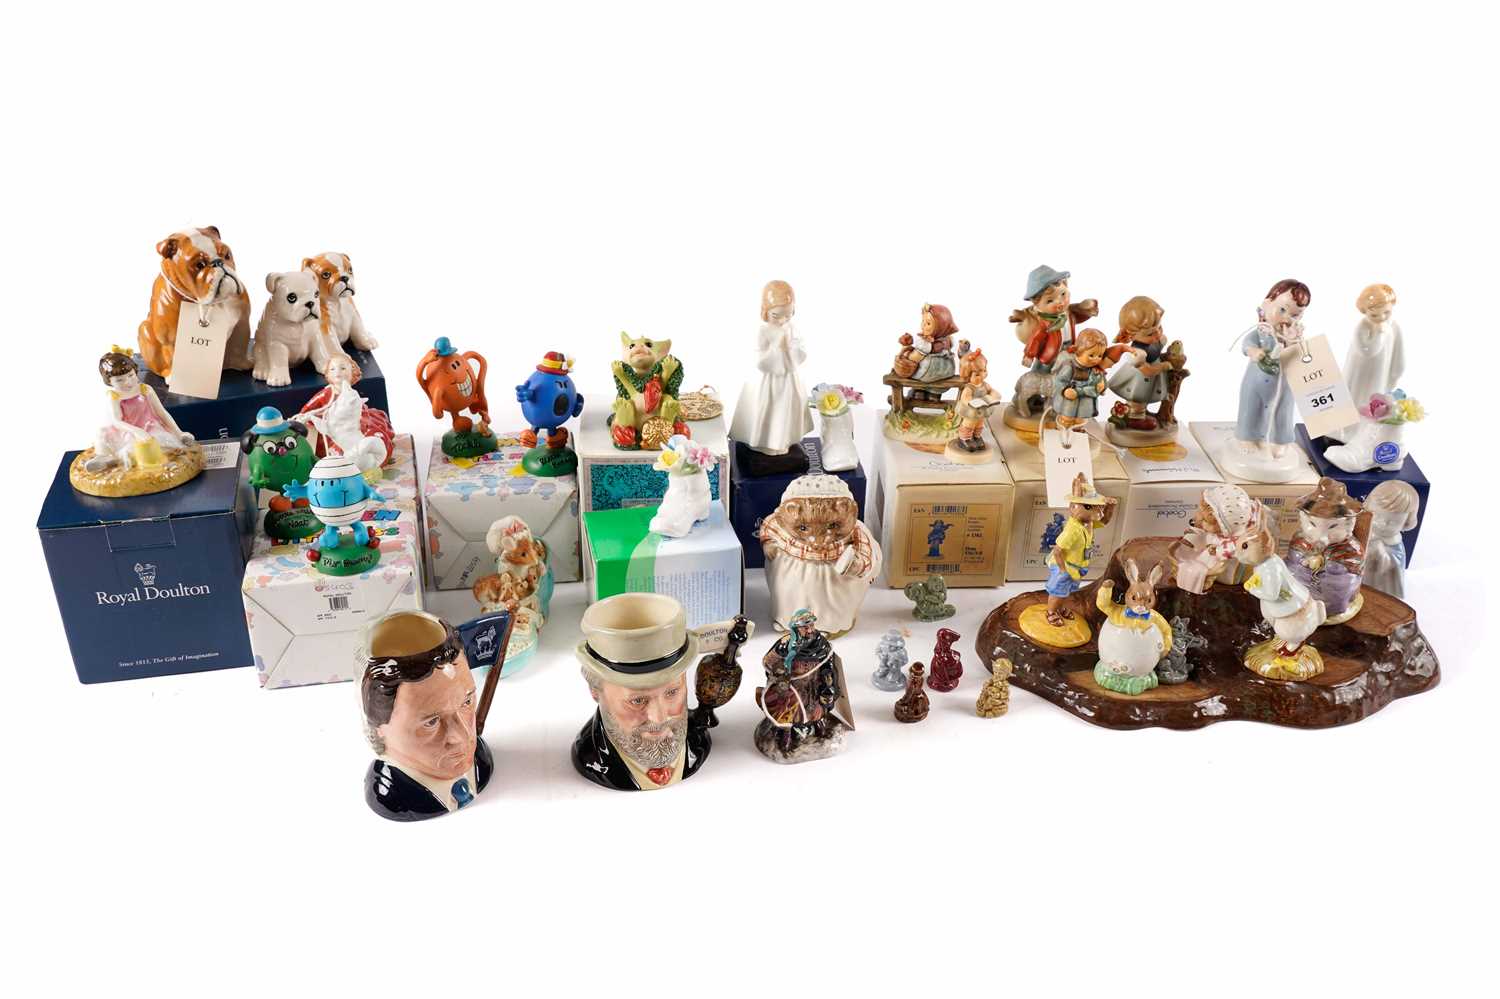 A collection of decorative figures by Royal Doulton, Hummel, Royal Albert and others